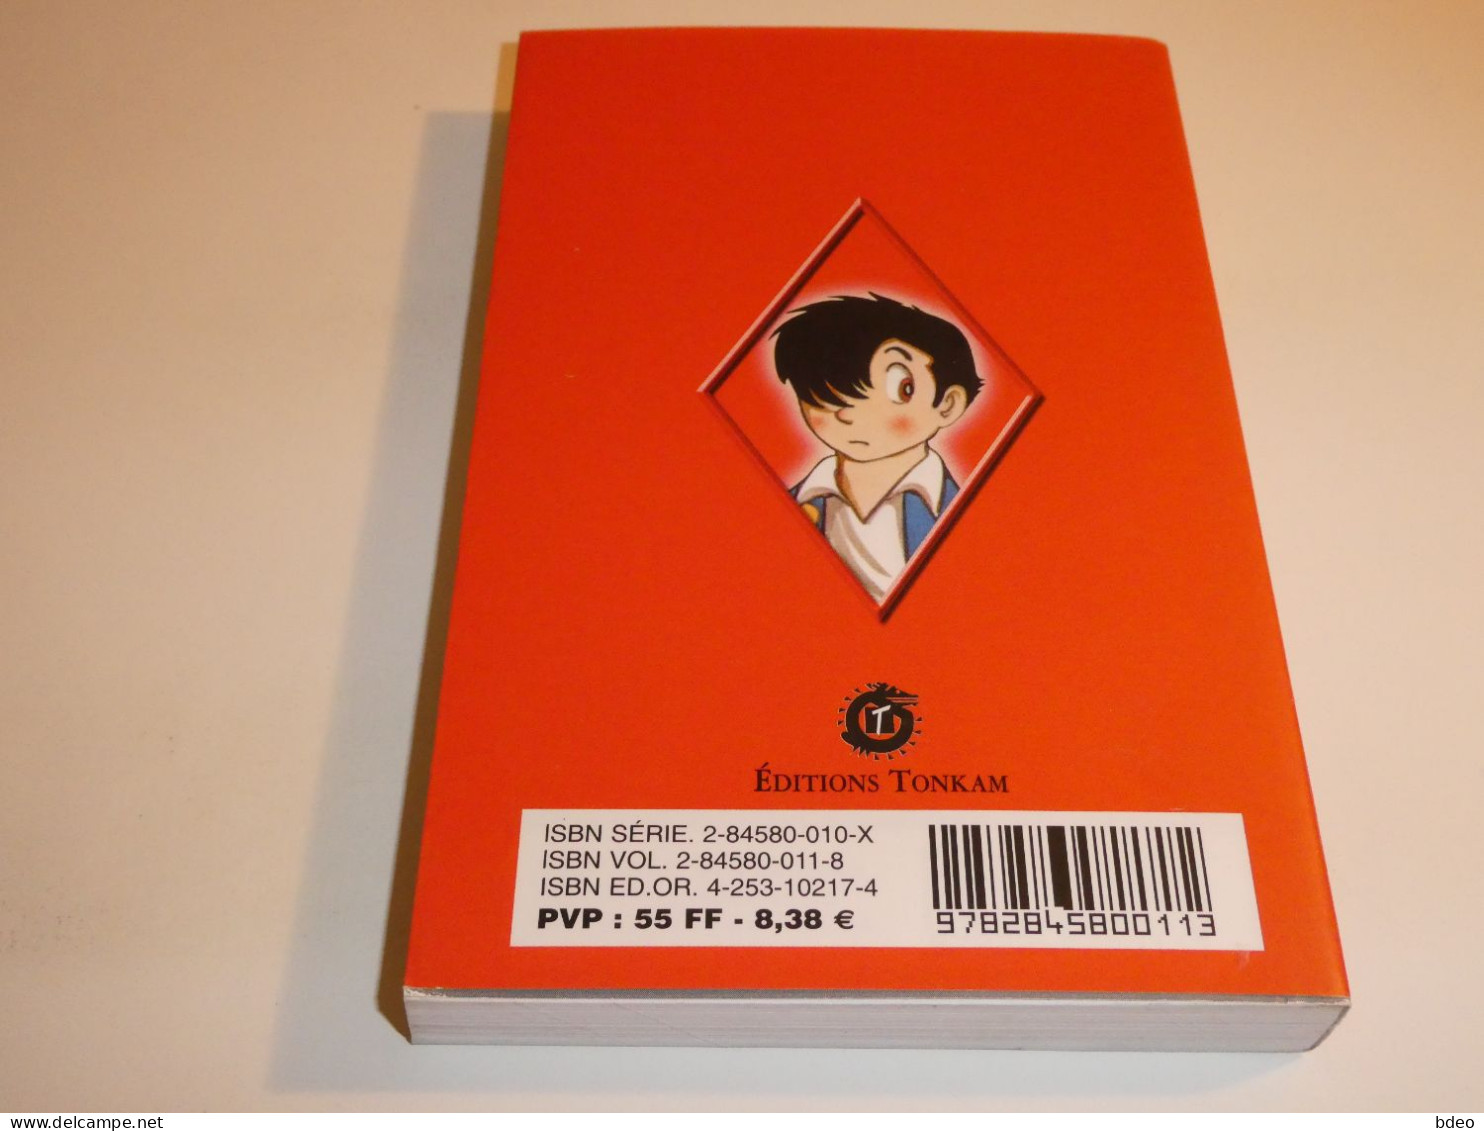 LE CRATERE TOME 1 / TEZUKA / TBE - Mangas [french Edition]